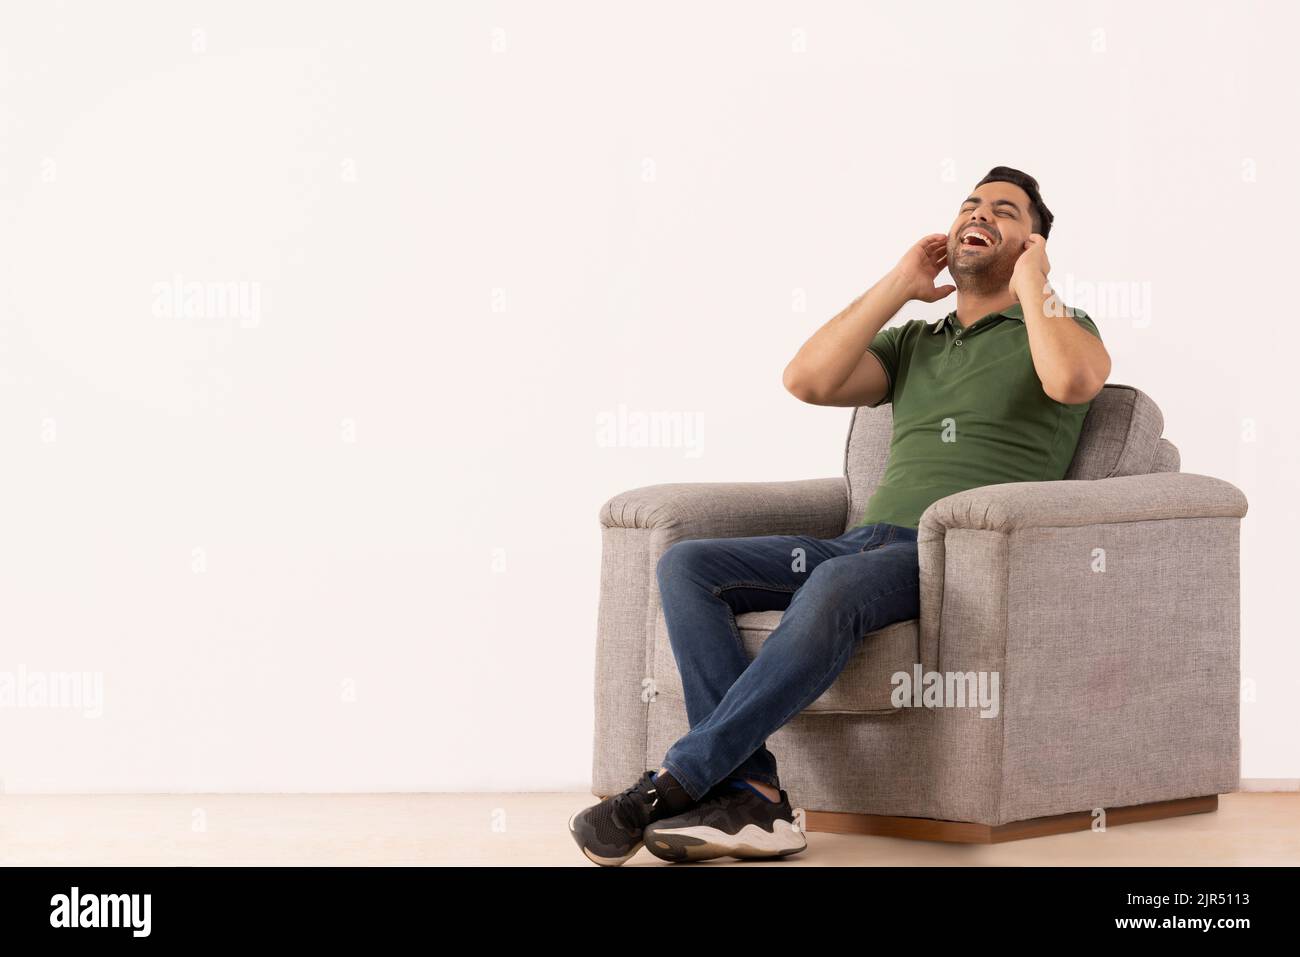 Portrait of young man smiling while sitting on sofa Stock Photo